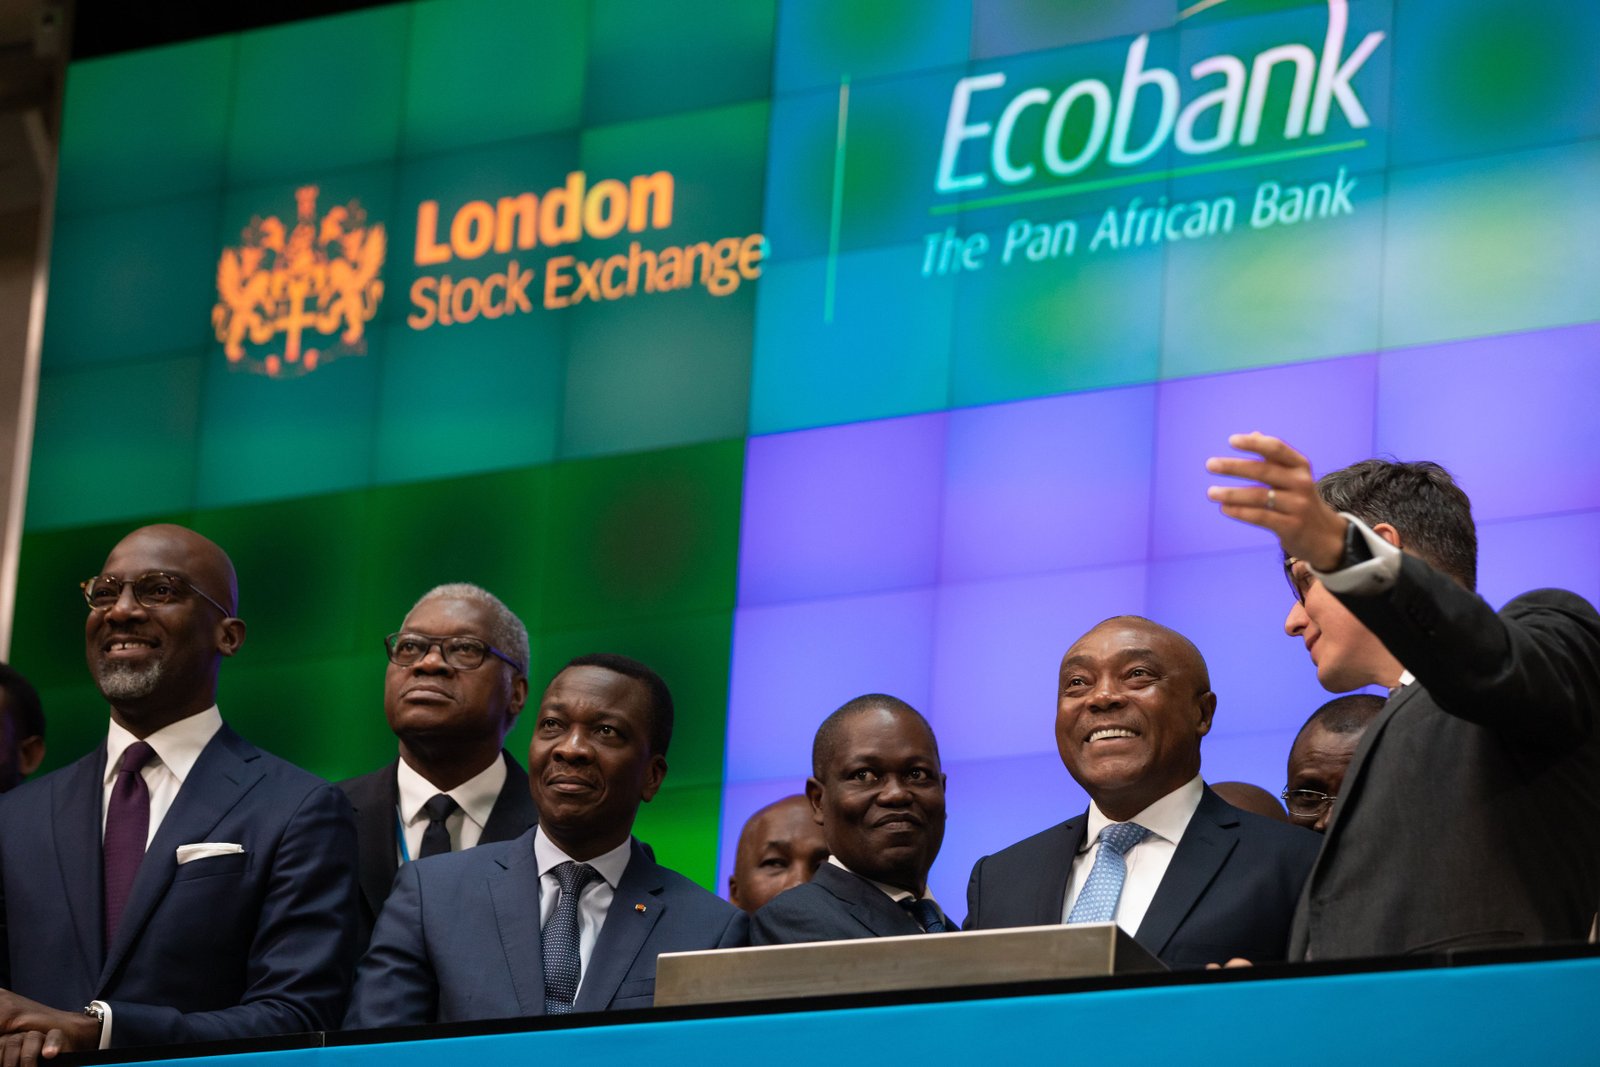 Ecobank hosted by London Stock…